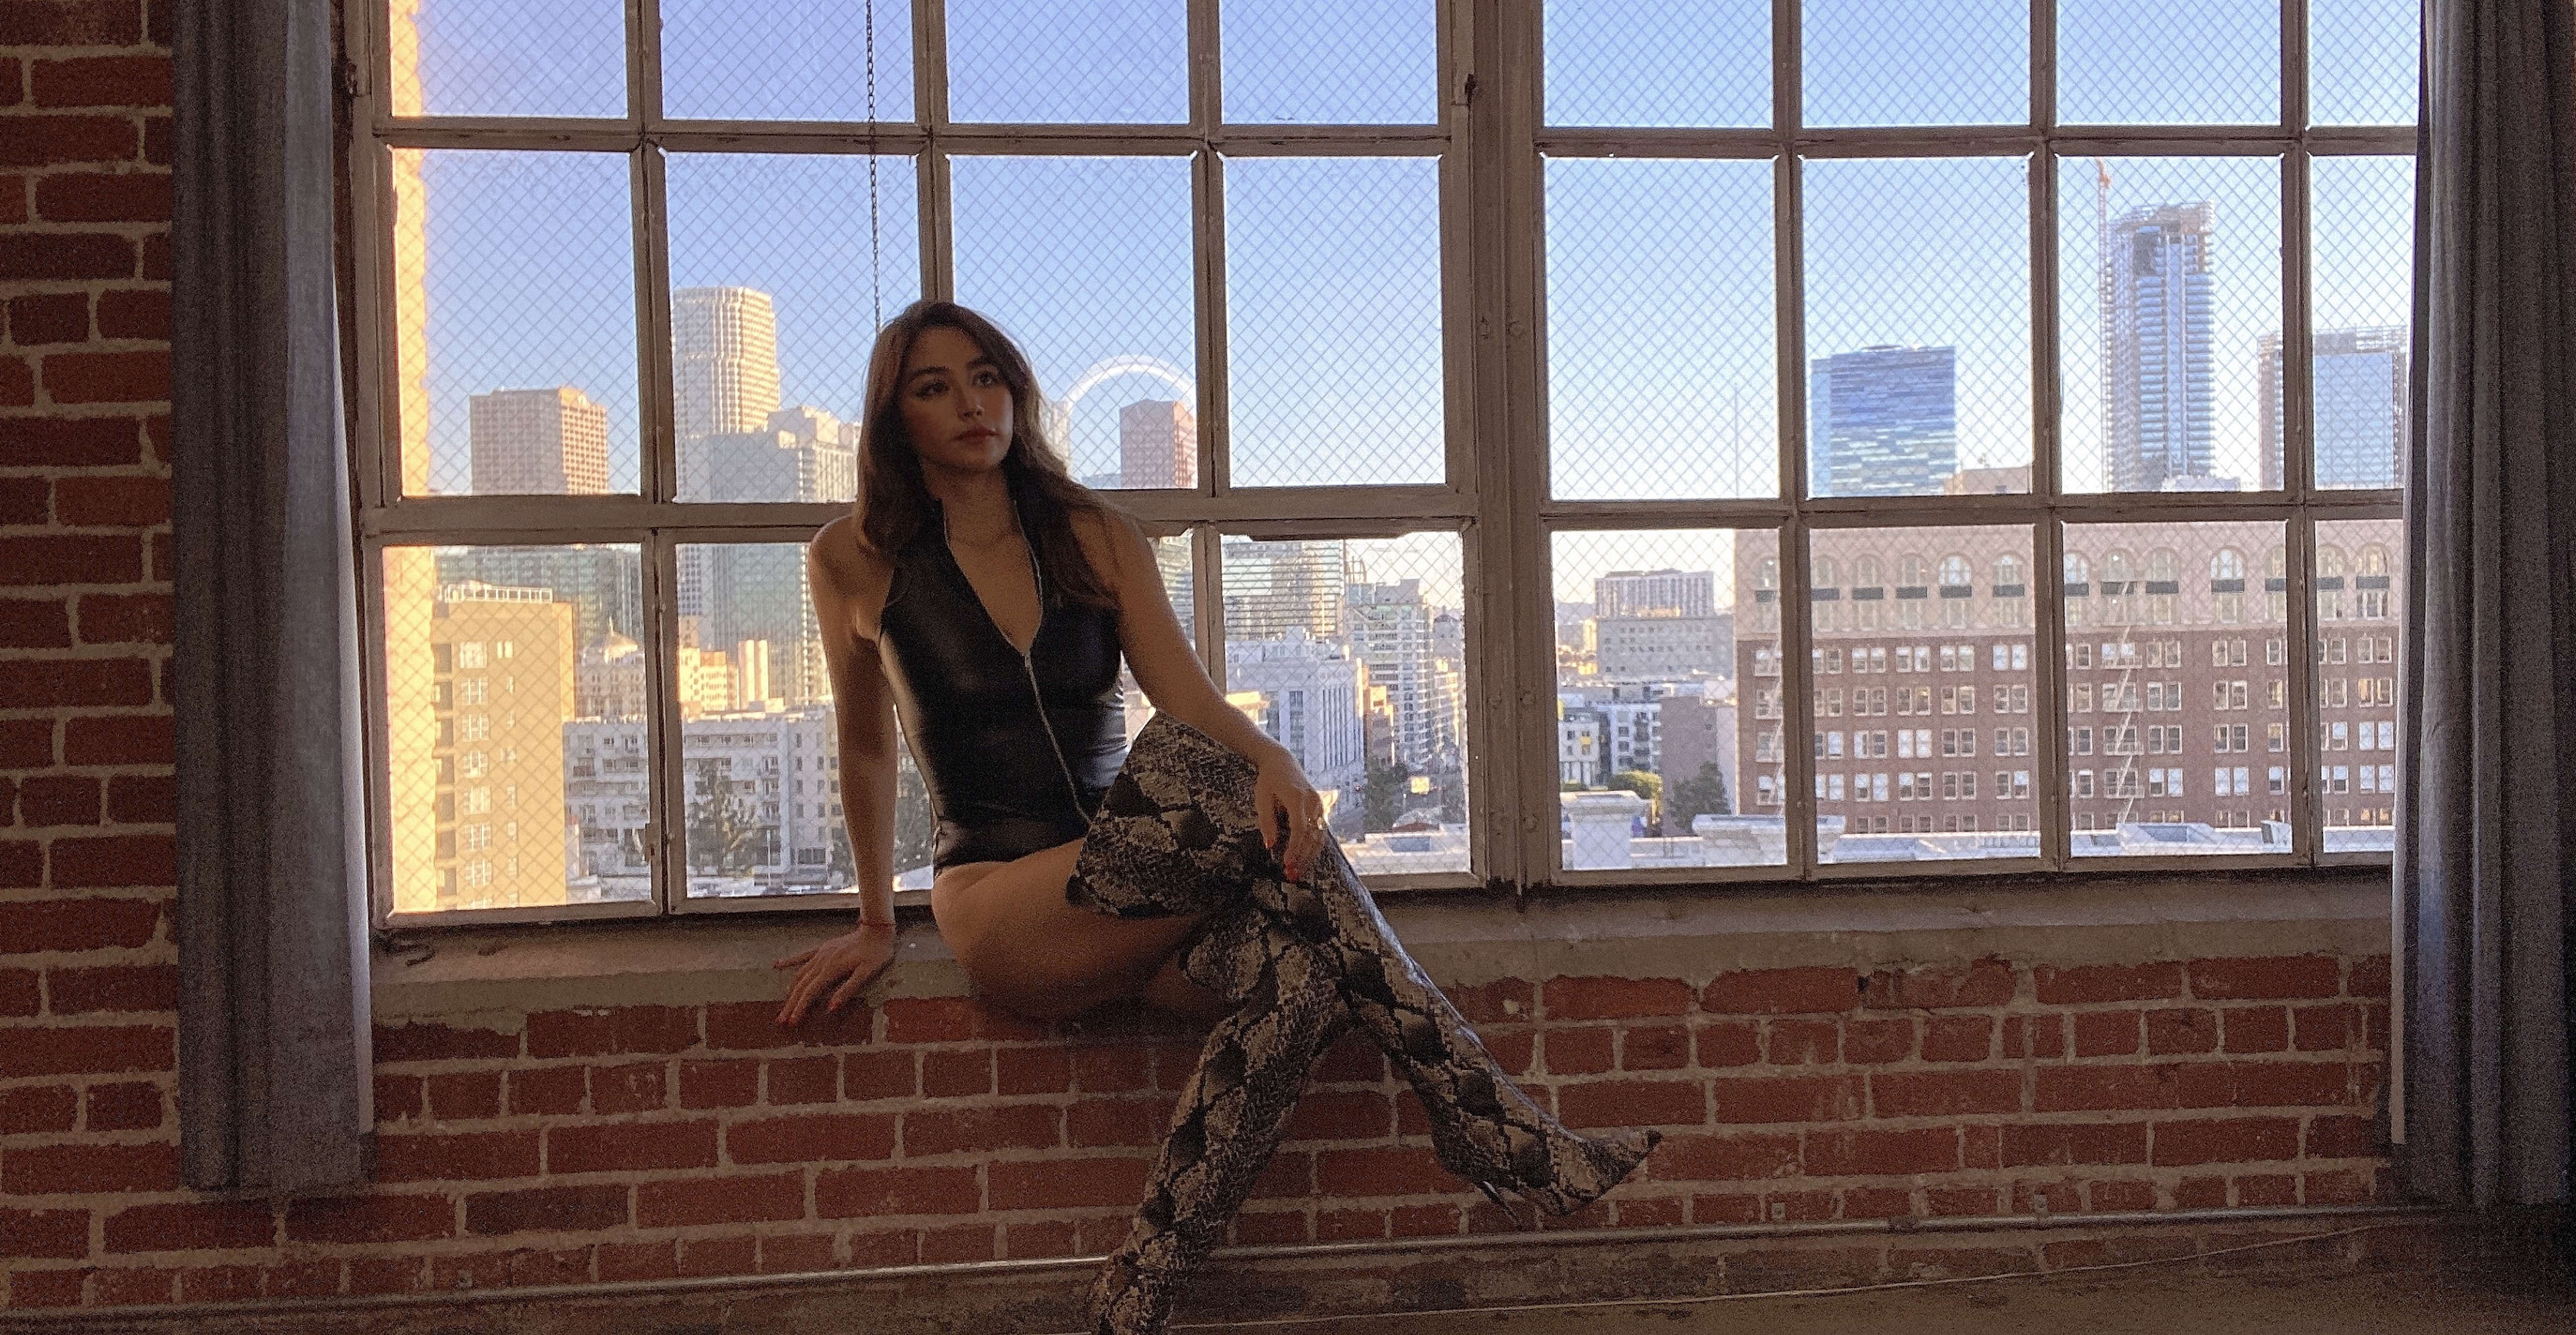 A model with tall boots posing on a window sill for a fashion photoshoot.